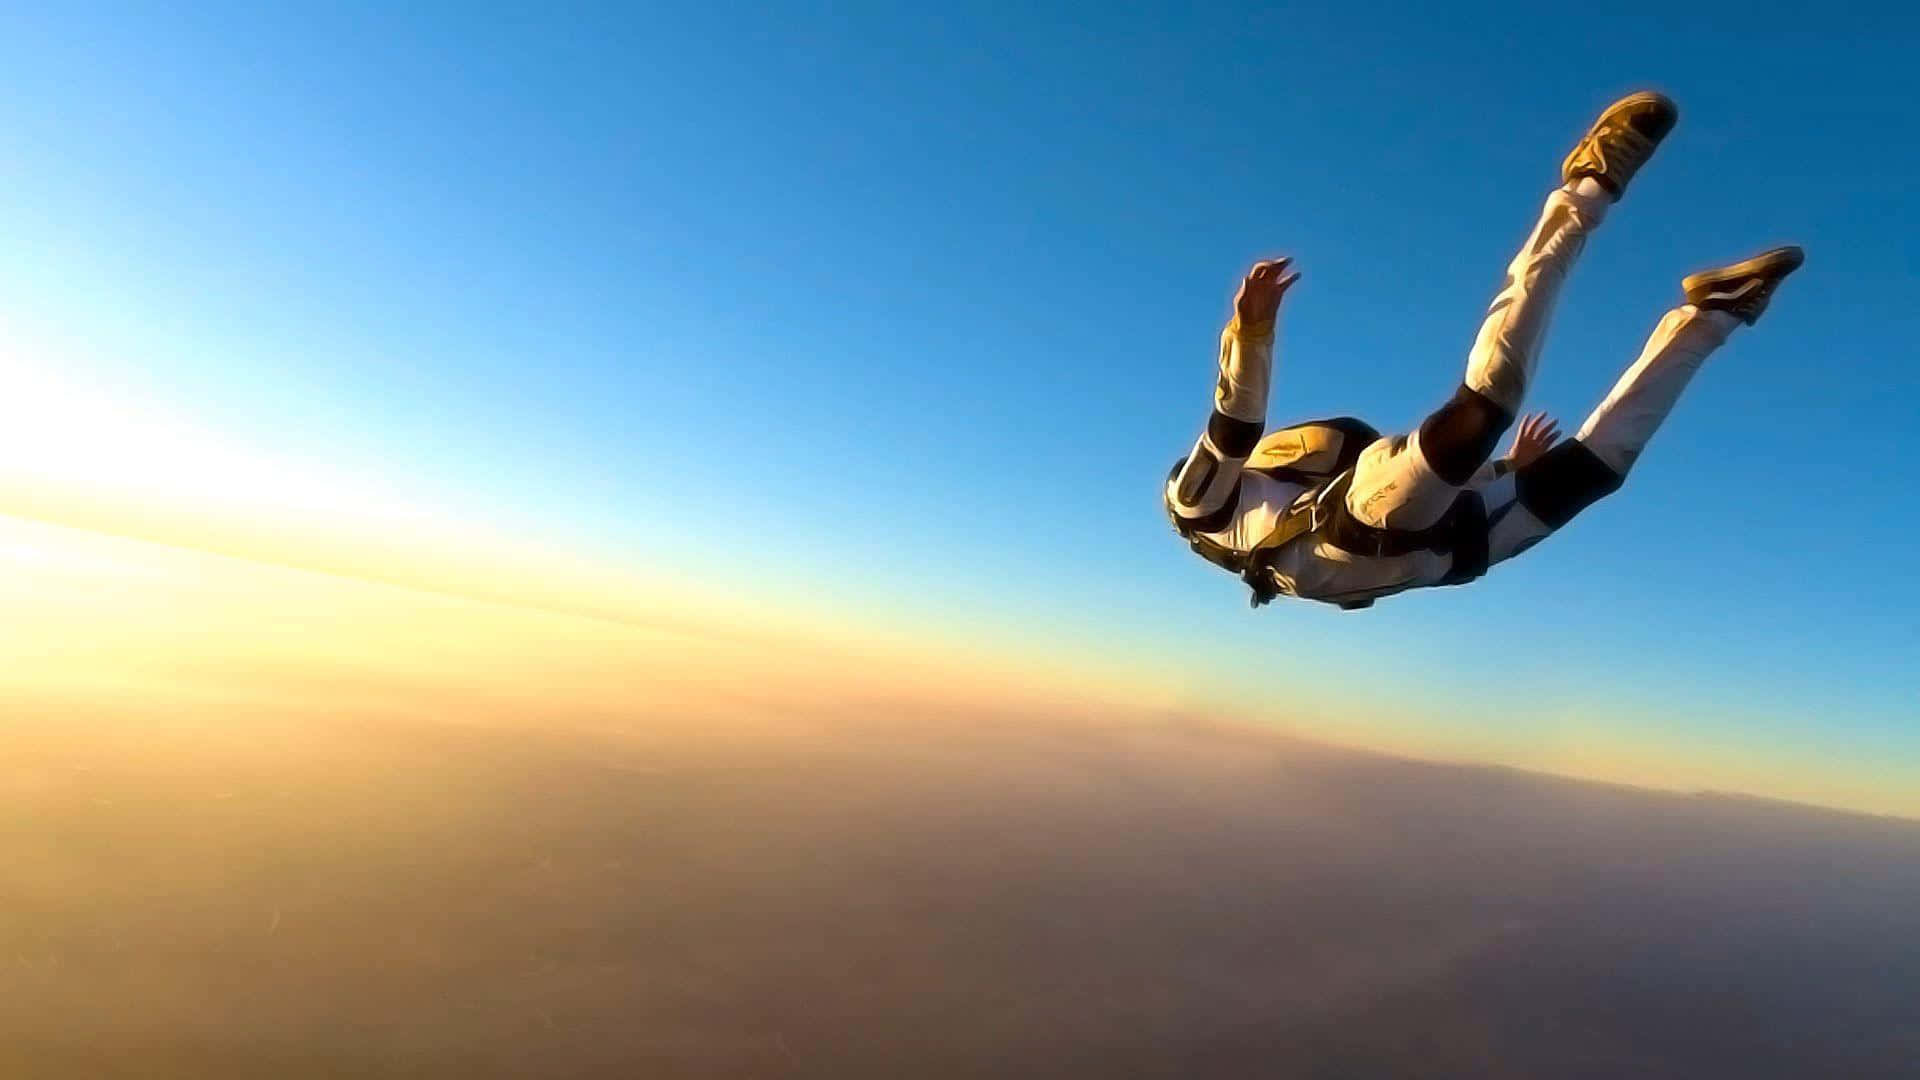 Take the leap and join the thrill of skydiving!